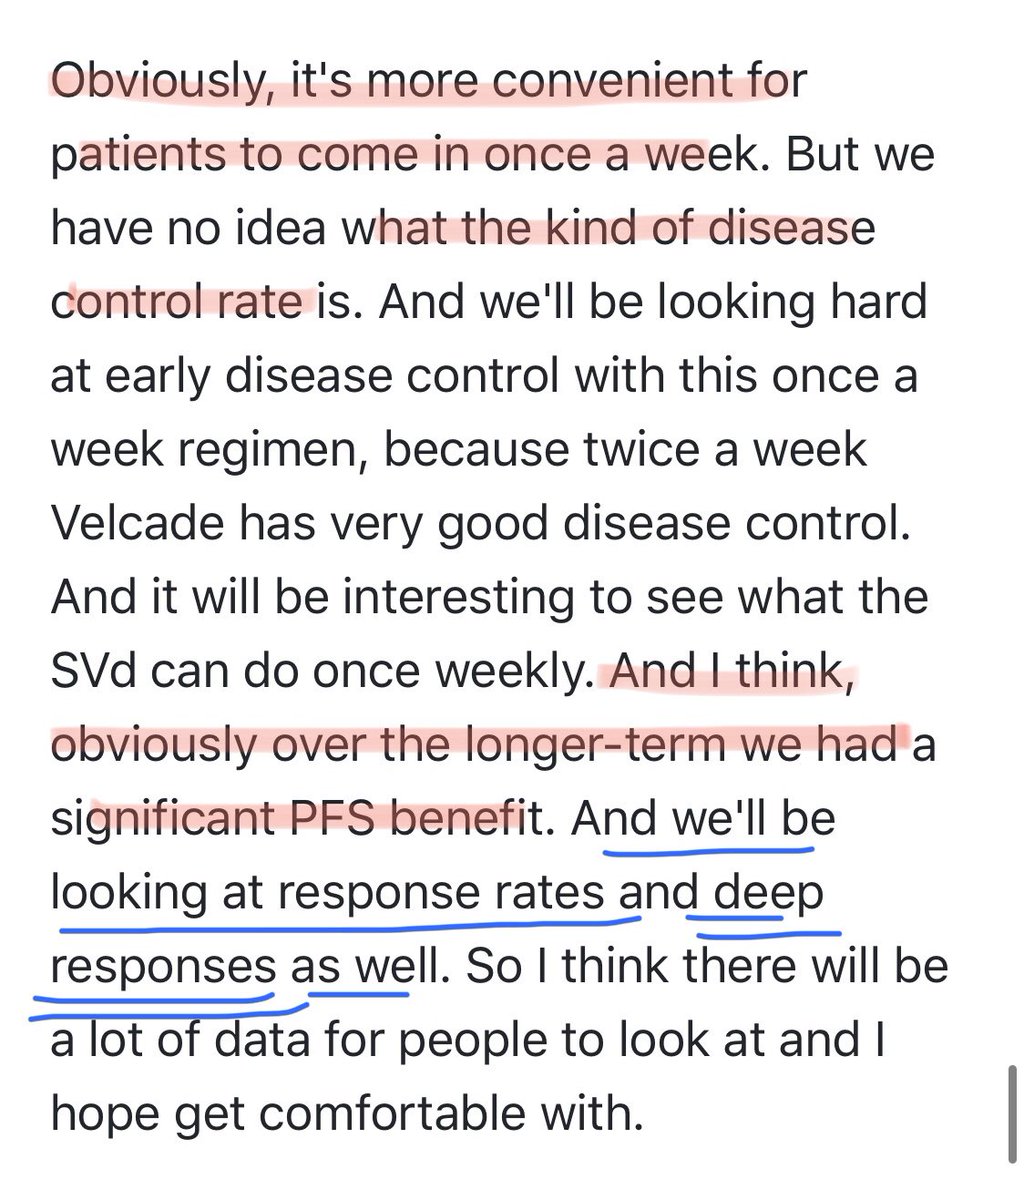  $KPTIWe know that control arm (Vd) mOS was 25 months — not unexpected, velcade is a known quantity...What is Unexpected & Important, then? must be selinexor. Numerically fewer deaths; mOS not reached; why?Not just topline ORR, but the quality— “deep responses”: